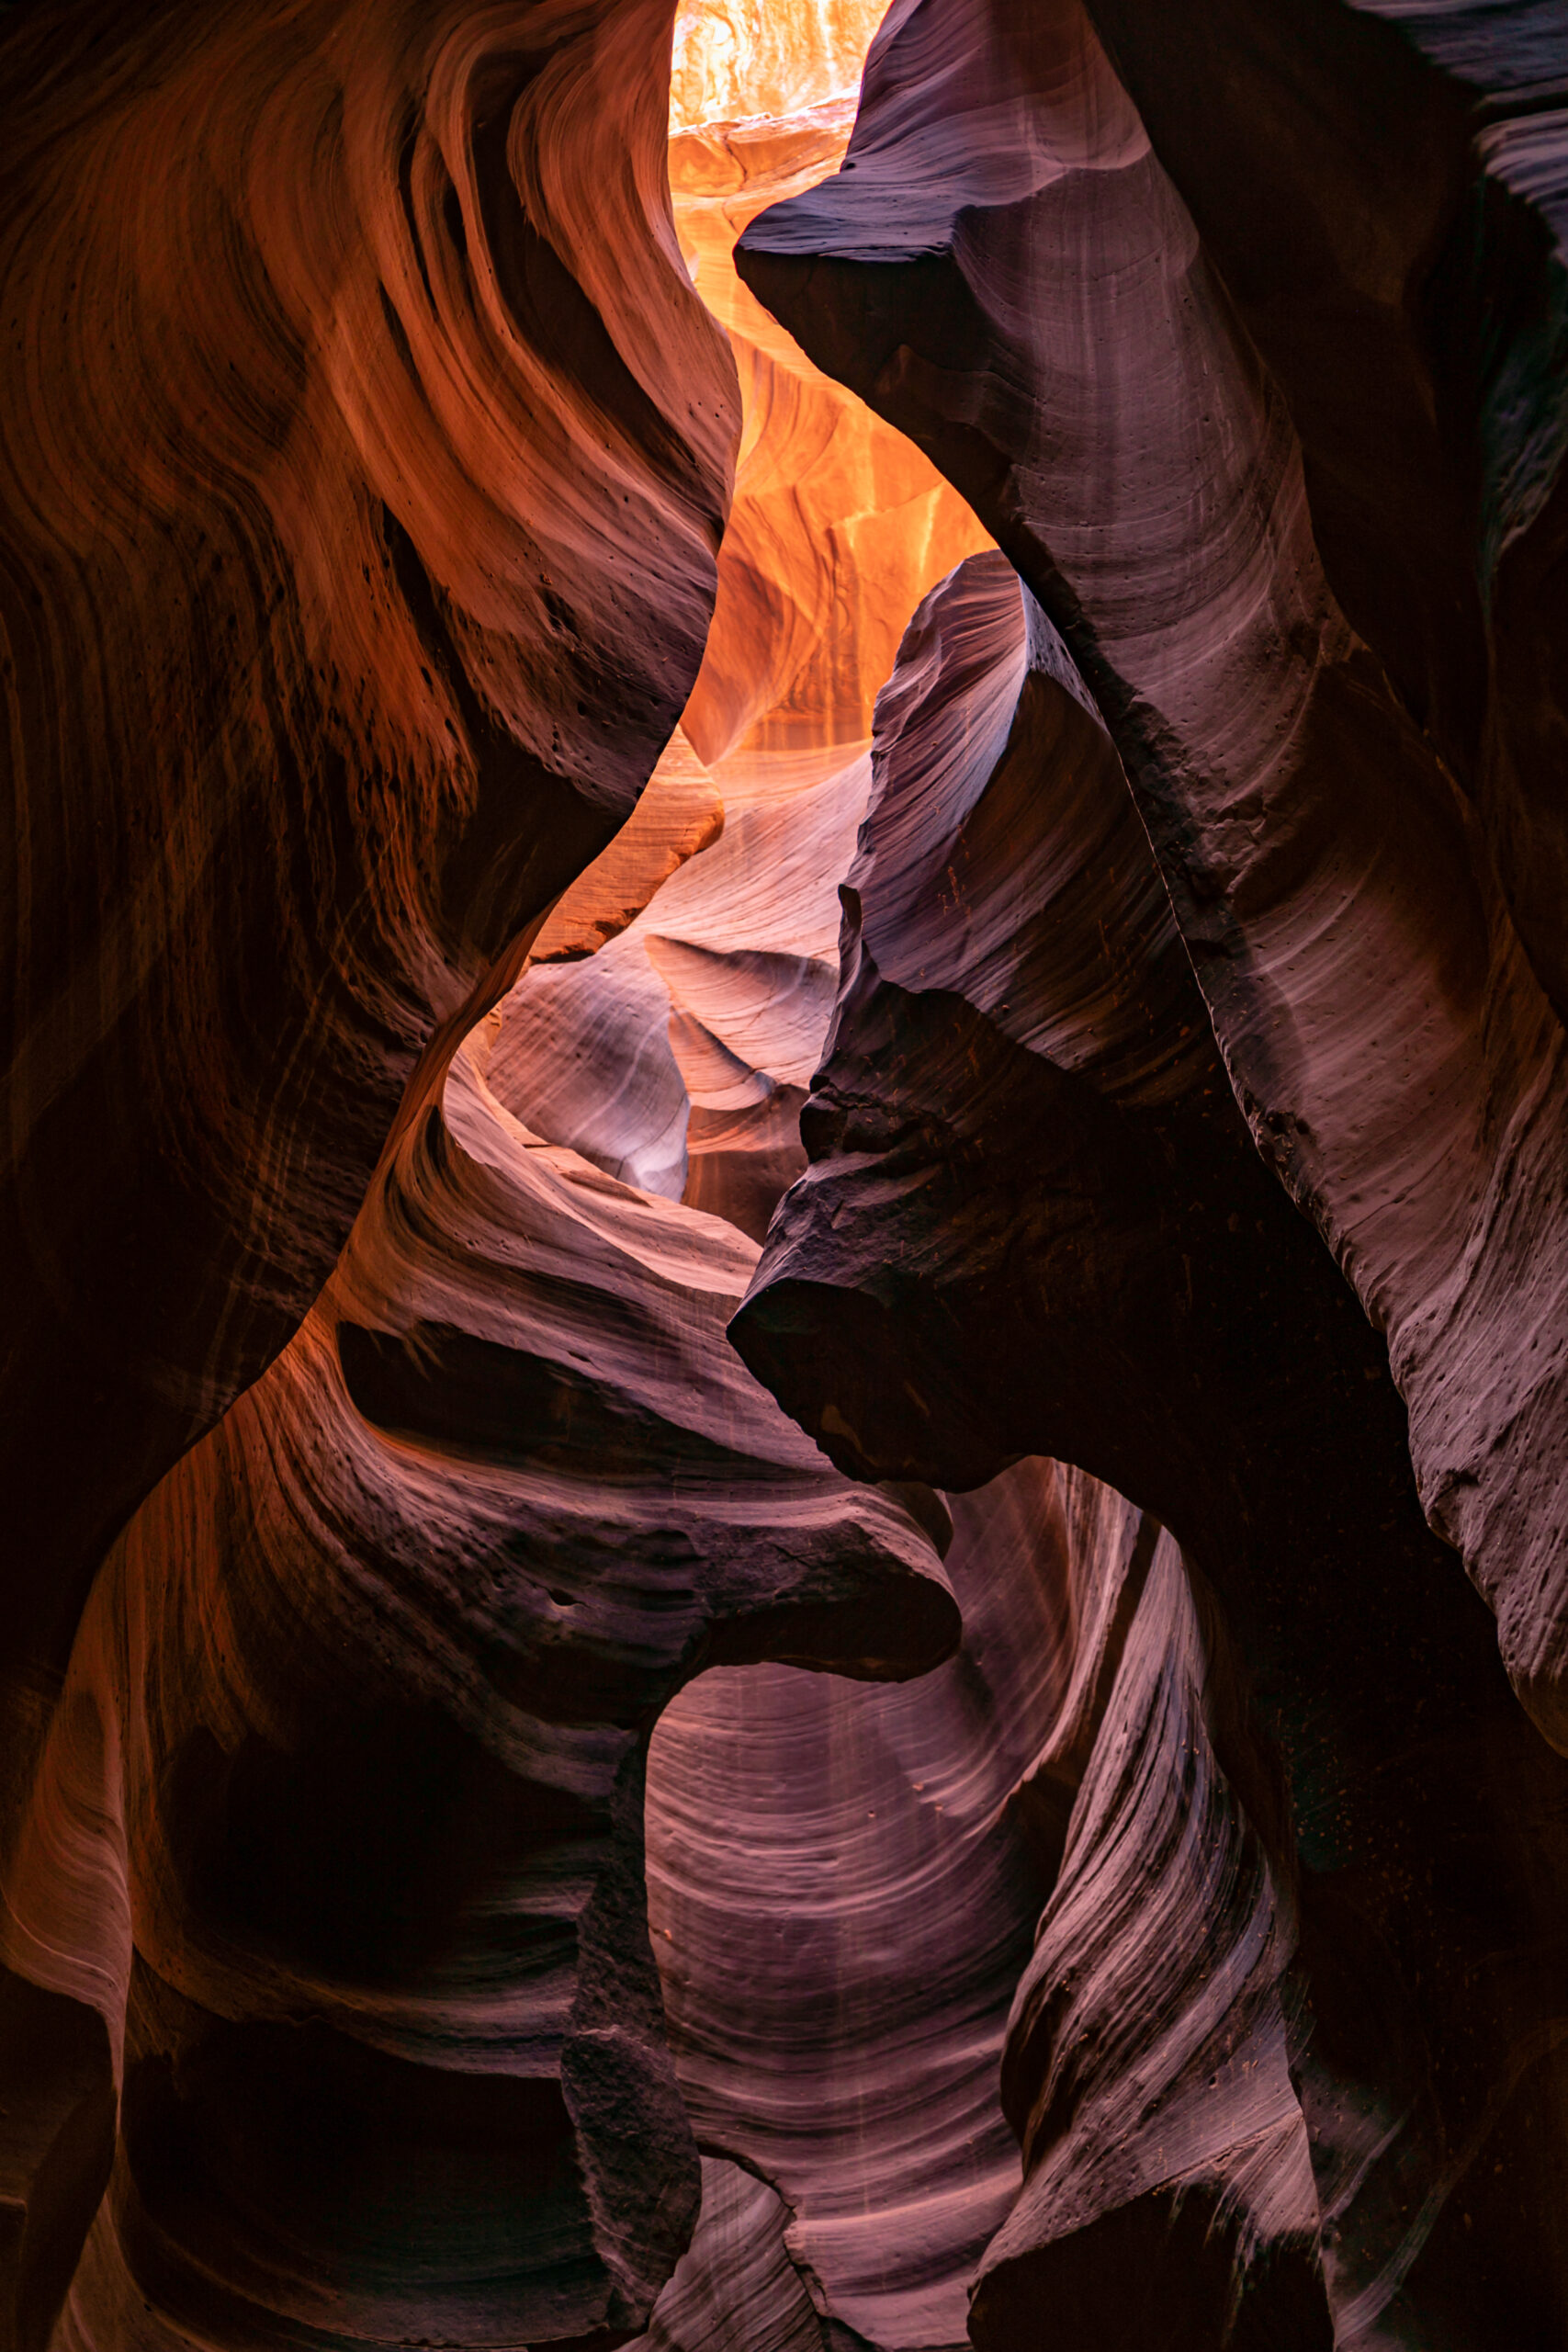 WONDERS OF OUR PLANET, Road Trip the USA by Camille Massida Photography